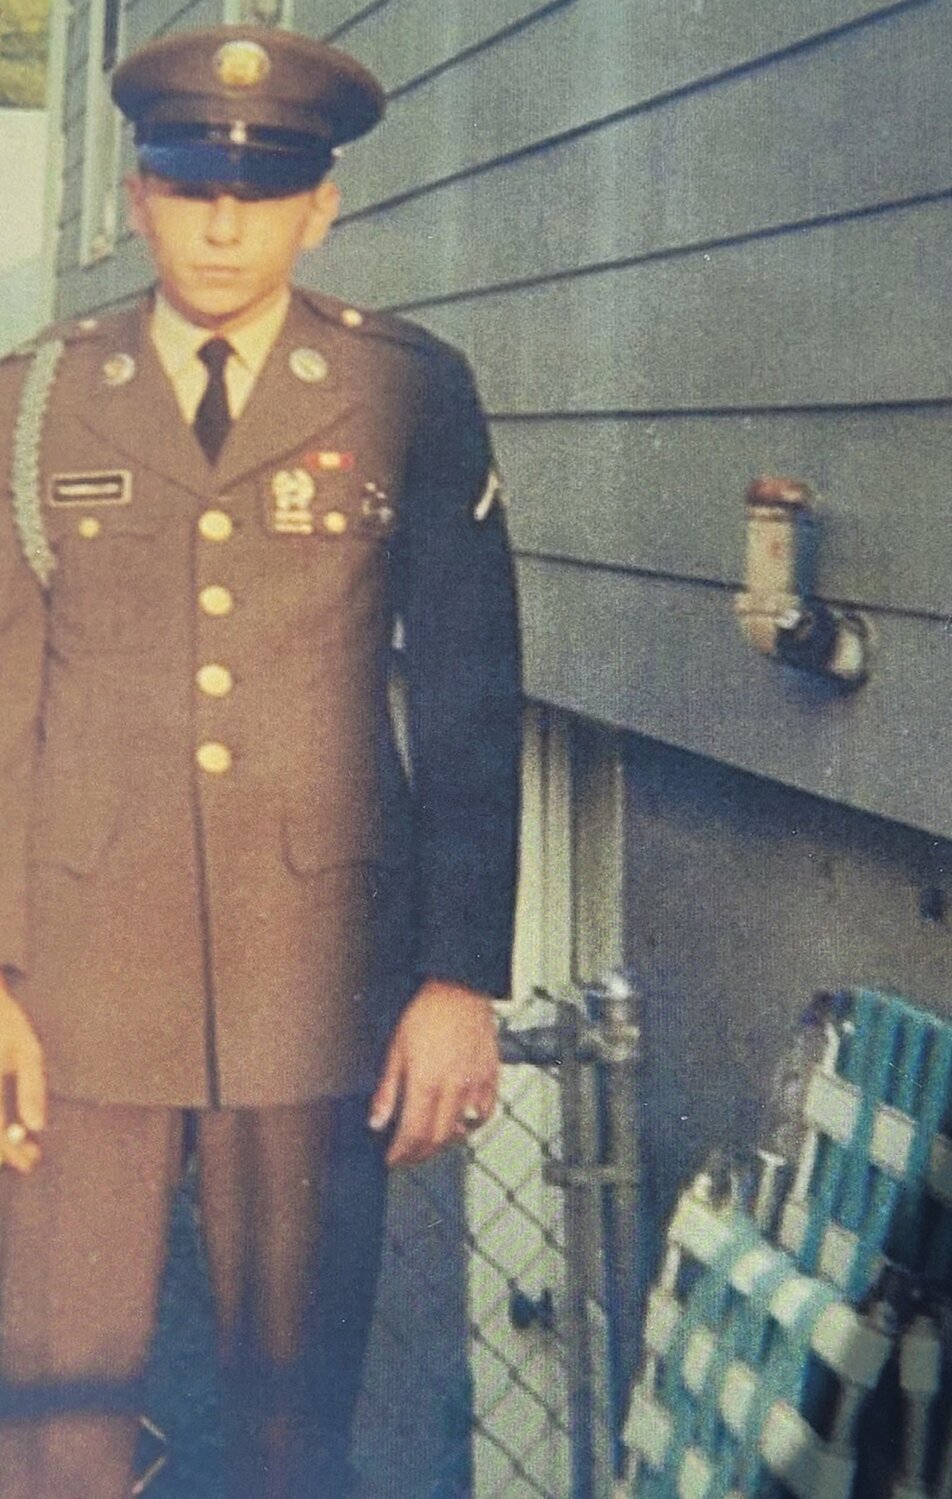 HIS LIST: Retired U.S. Army Sgt. John Tammelleo has a list of lost buddies he wants to look up on the Vietnam Memorial Wall. He plans to find each of the names and make rubbings. Tammelleo shared this photo from his time serving in the infantry during the Vietnam War.